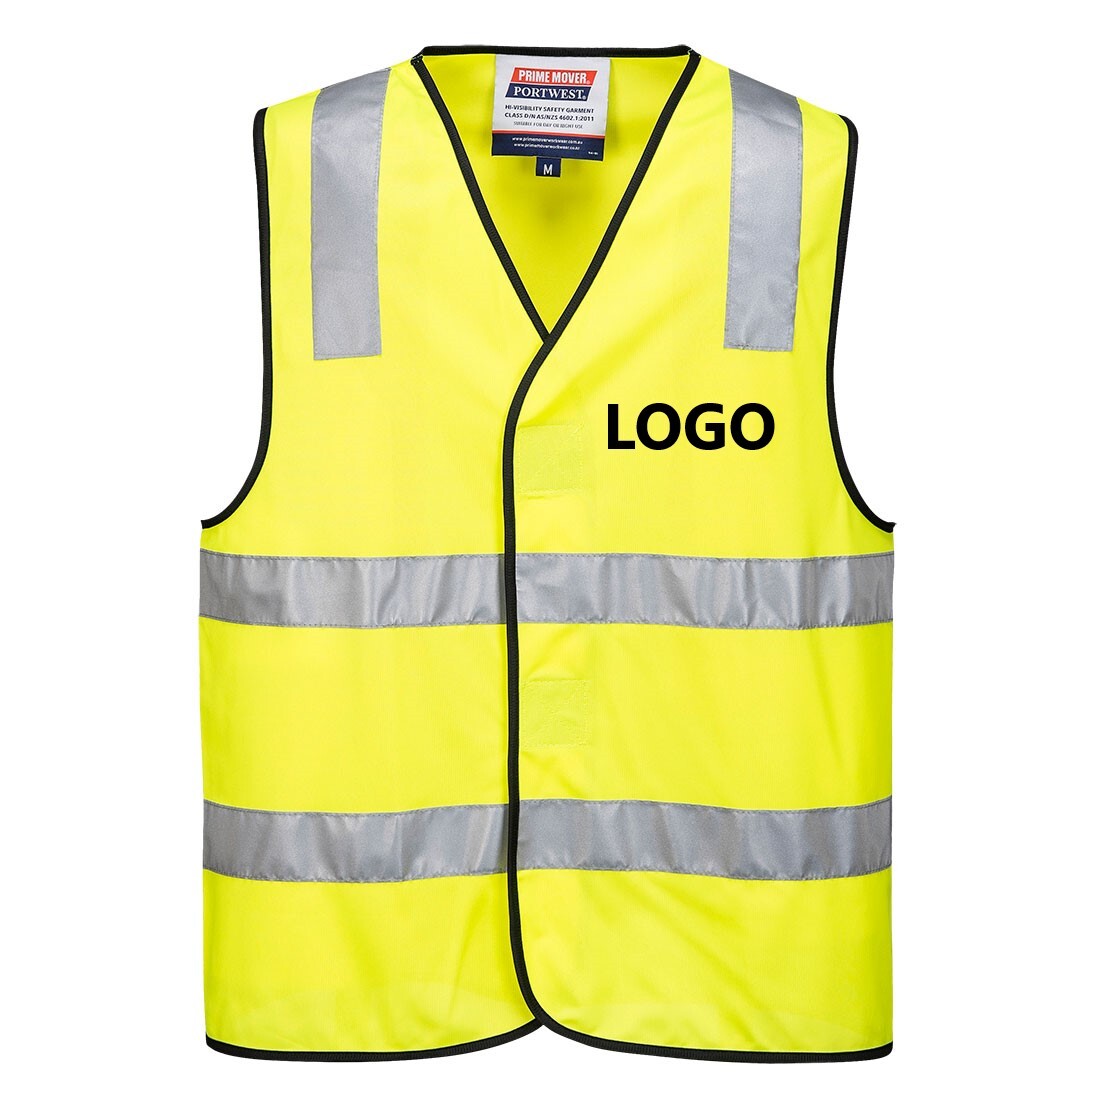 Safety Vest with Black Logo - Front Only